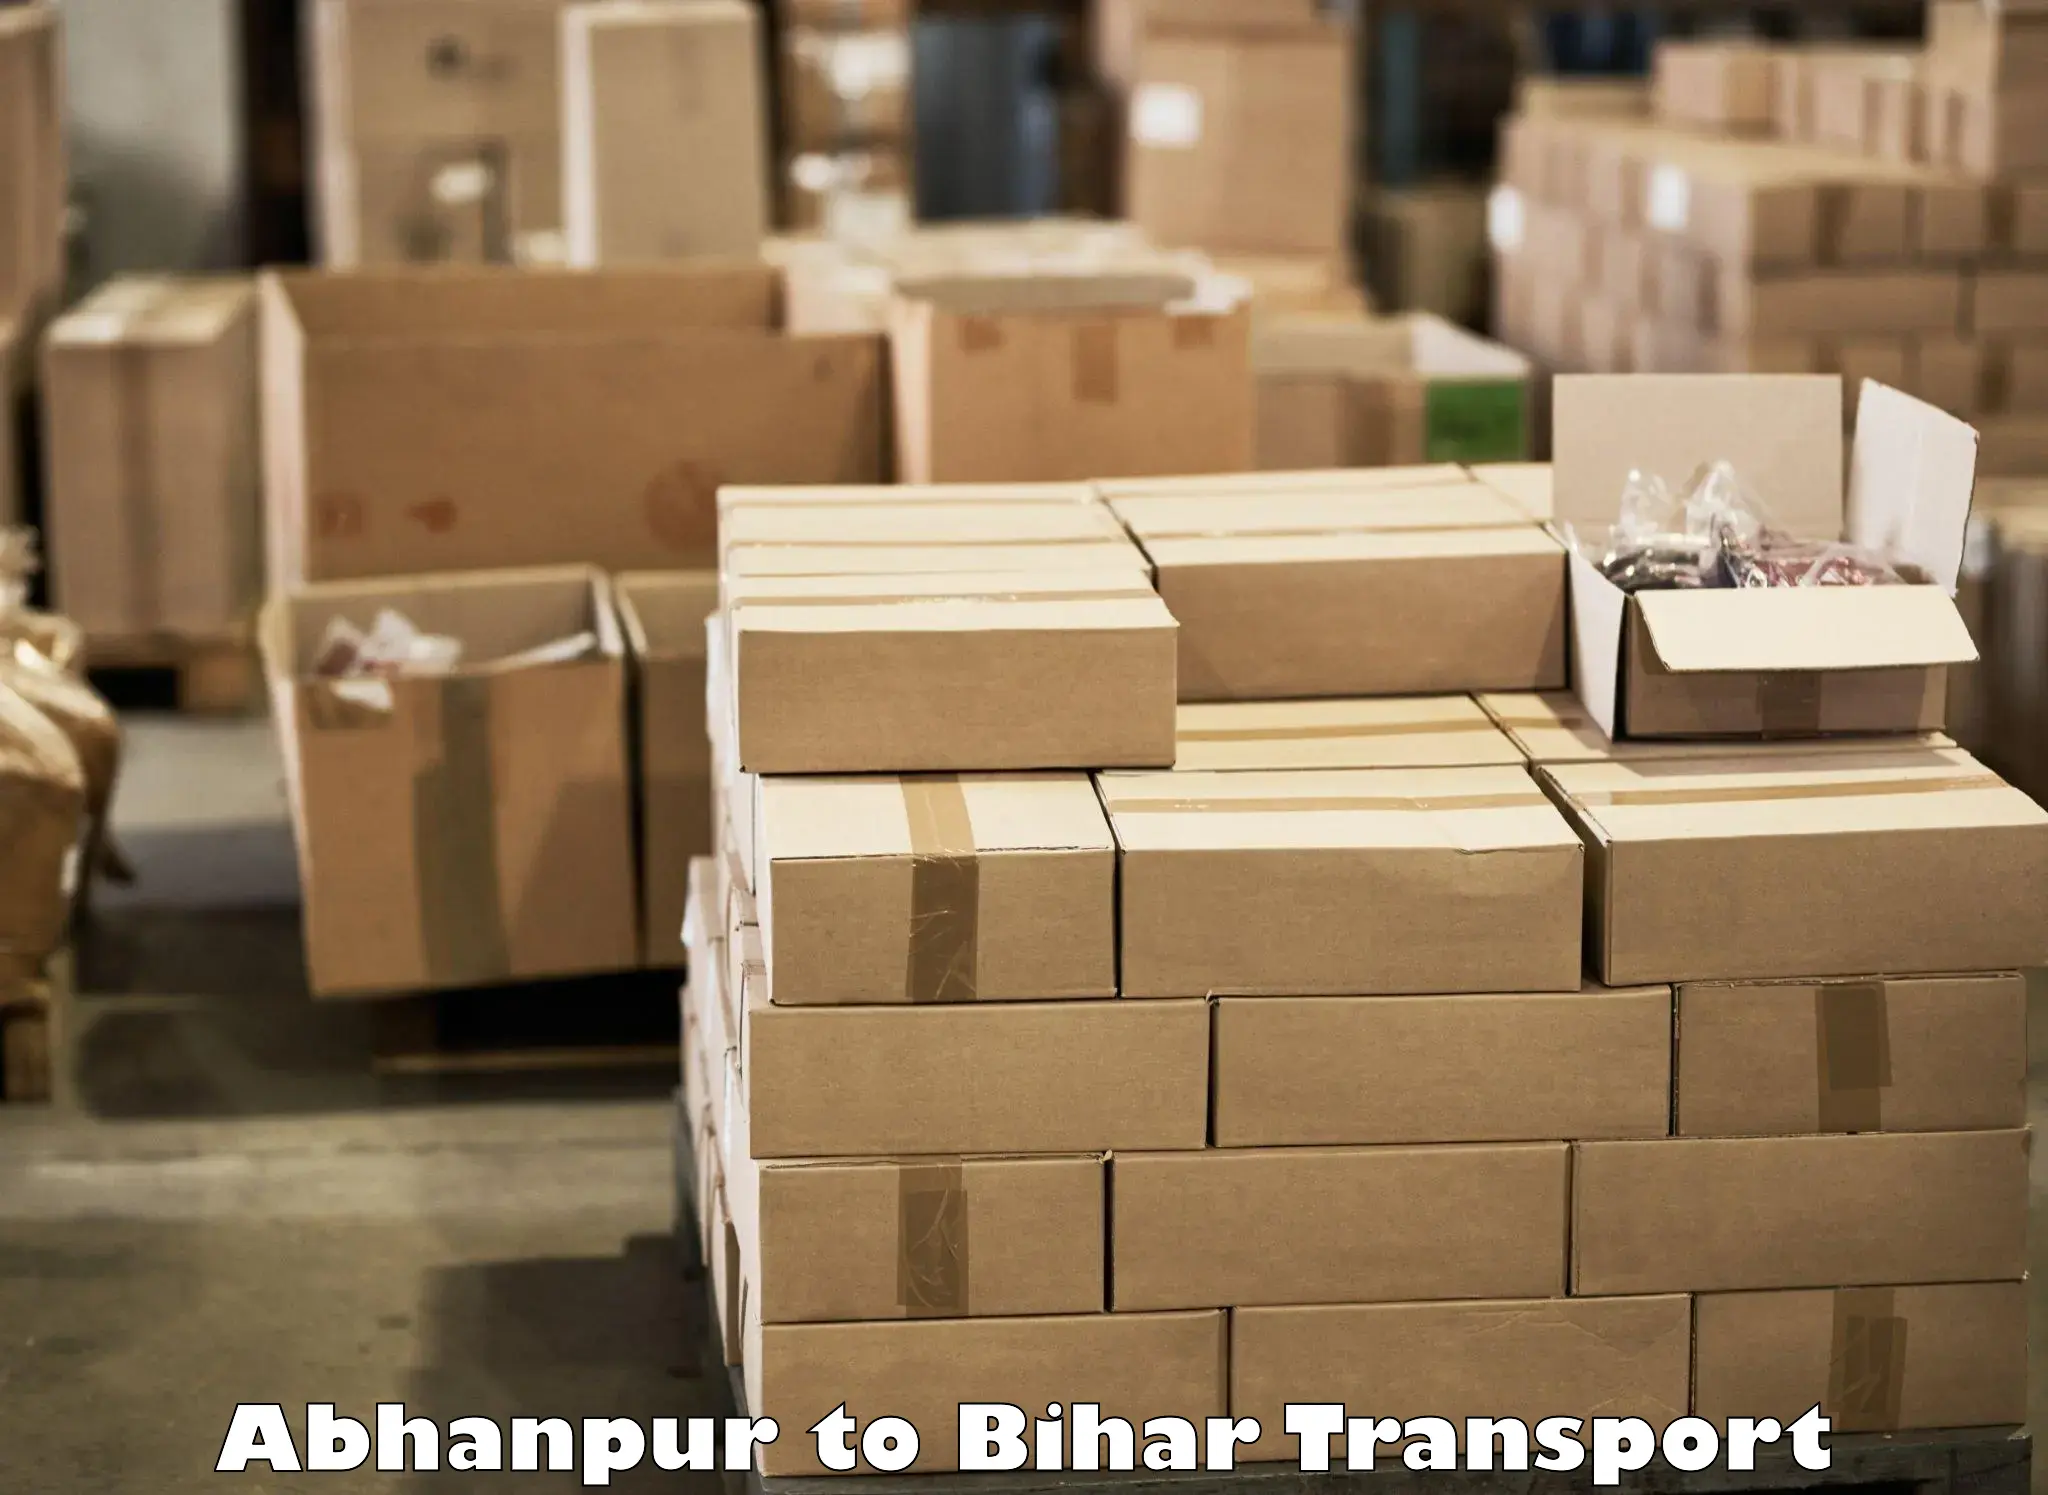 Daily transport service Abhanpur to Bihar